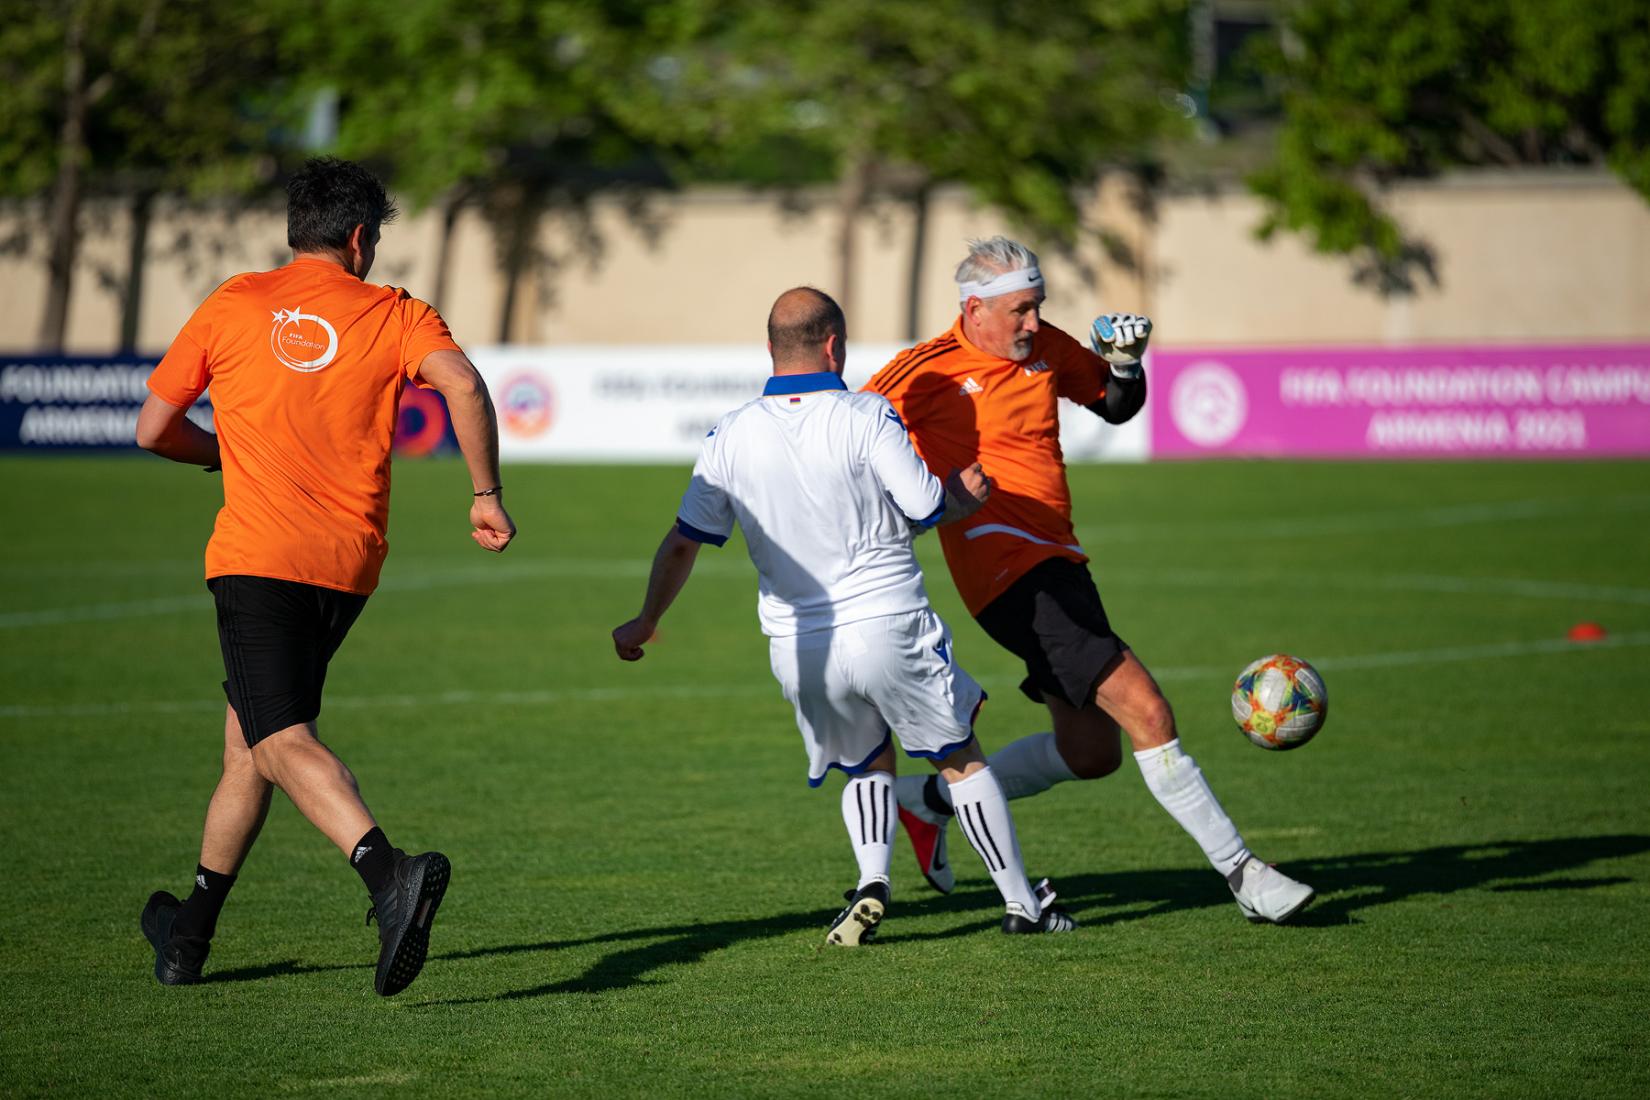 A shot from friendly match between FIFA Foundation and FFA.